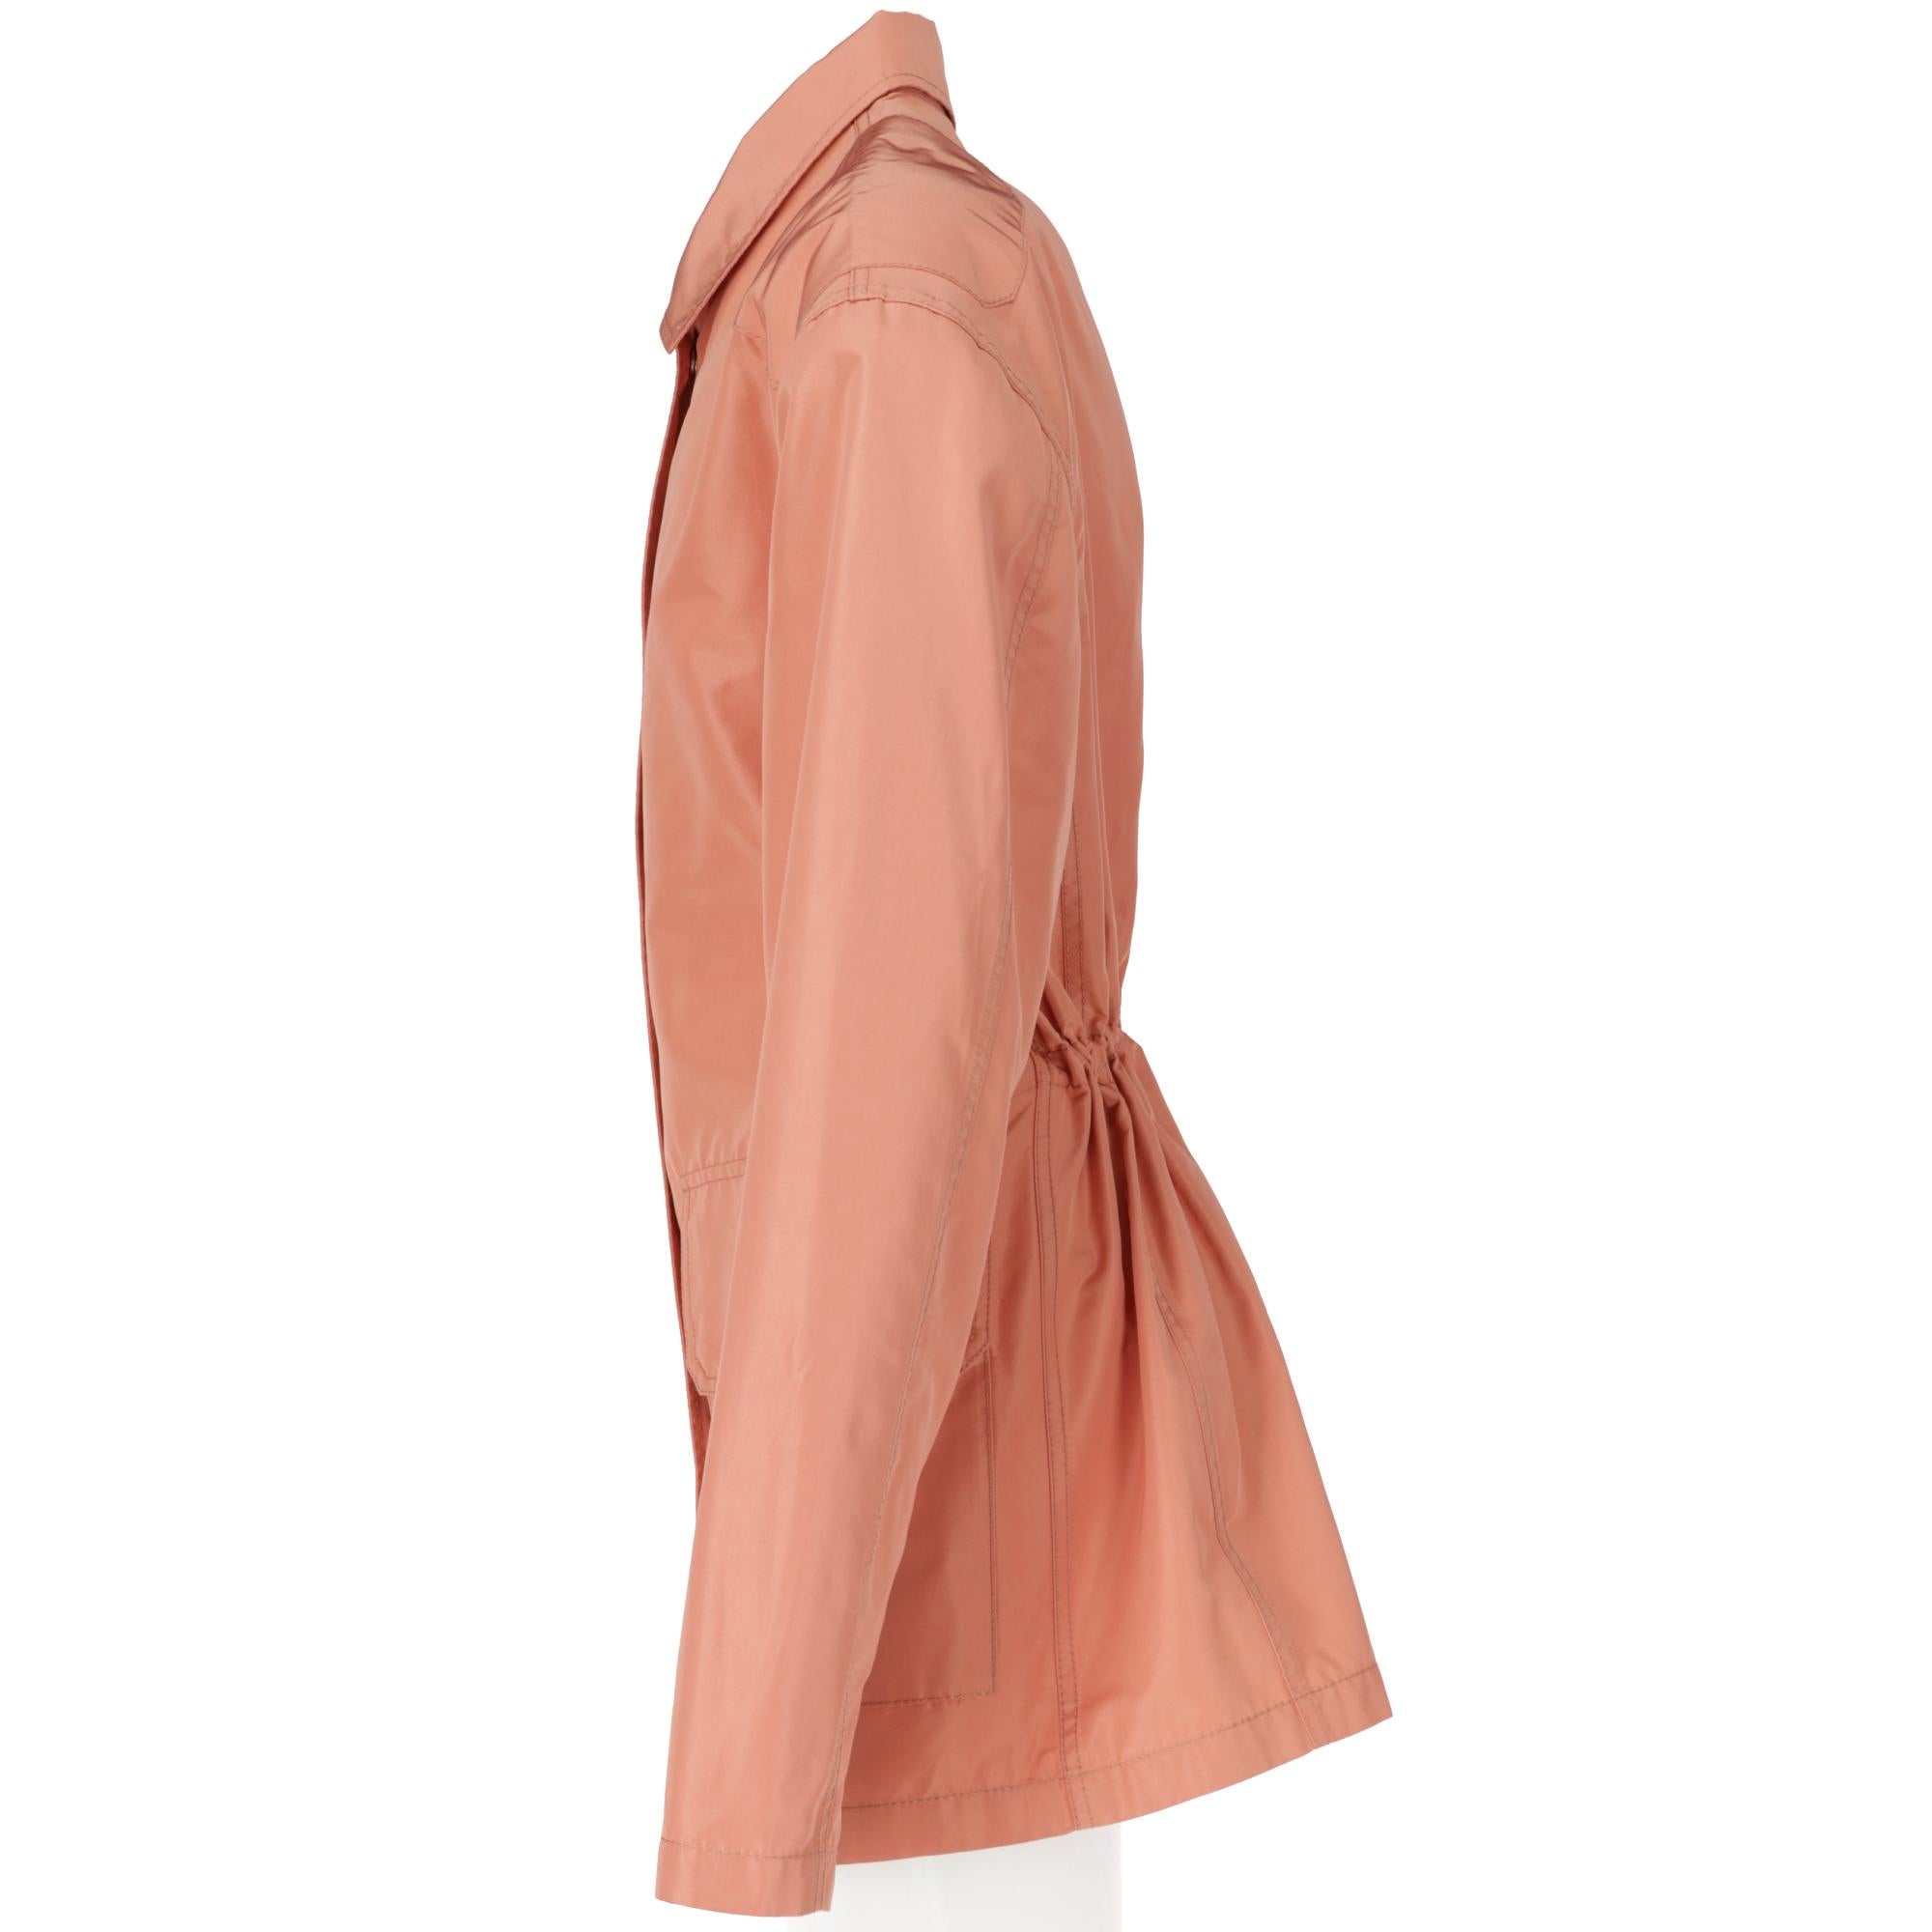 Jil Sander pink silk jacket with classic collar, front fastening with snap buttons, drawstring waist on the back, long sleeves, wide padded shoulder and patch pockets with flap and snap buttons.
Year: 2017

Made in Italy

Size: 34 EU

Linear